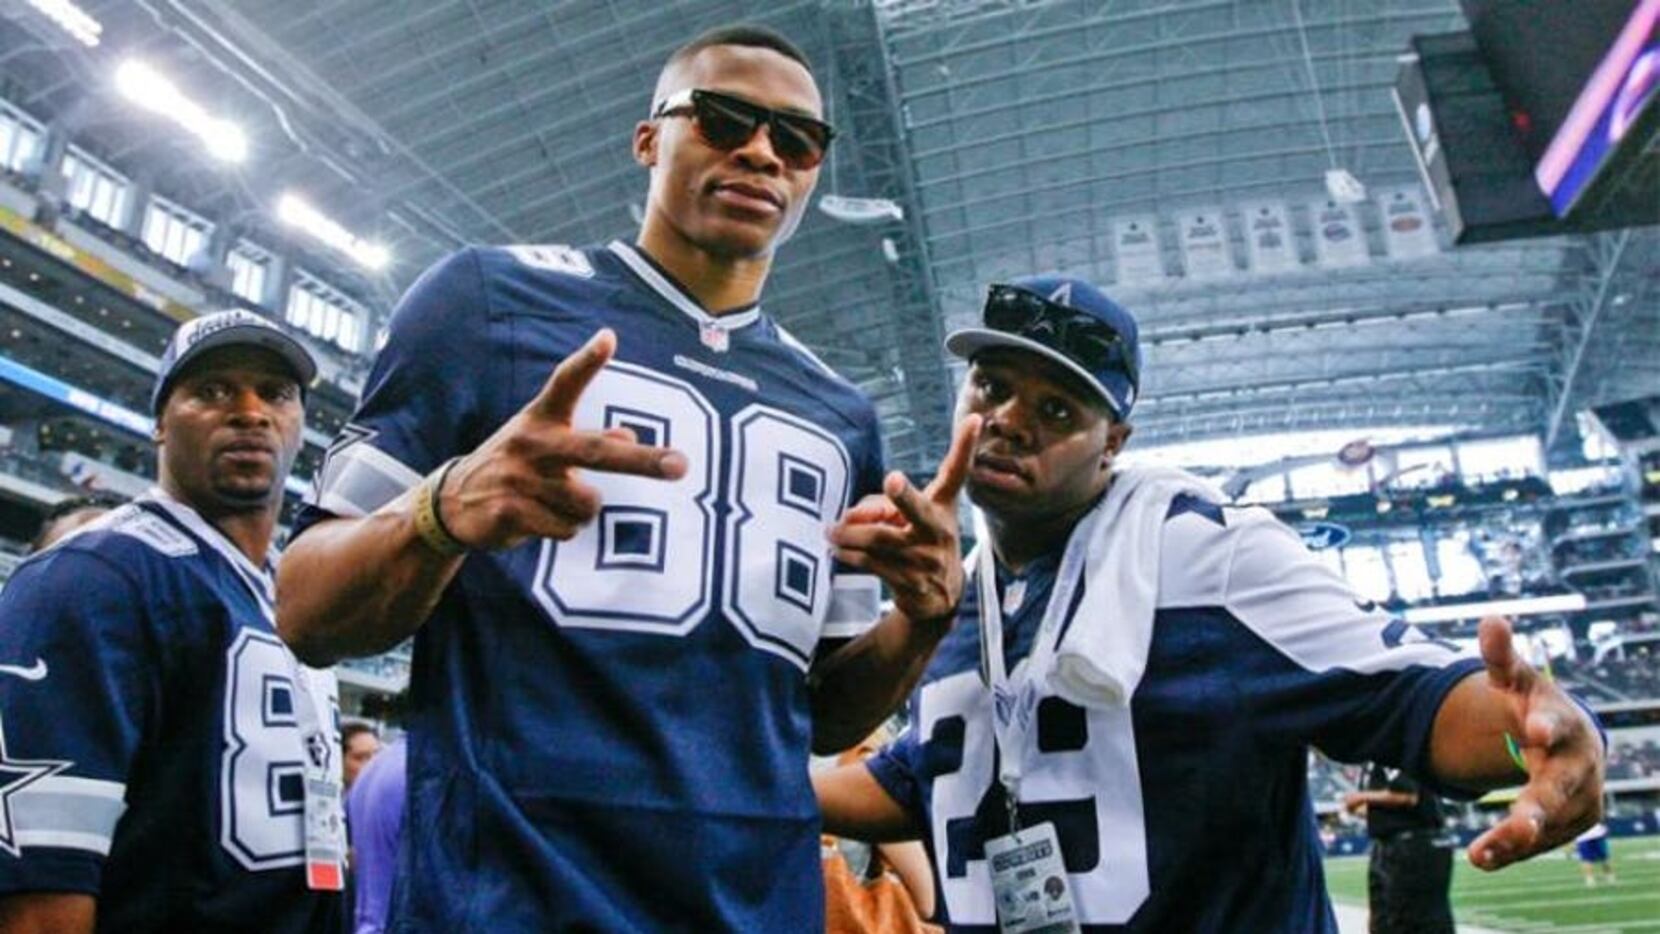 Celebrities who root for the Cowboys including Russell Westbrook, LeBron,  and 'Stone Cold' Steve Austin